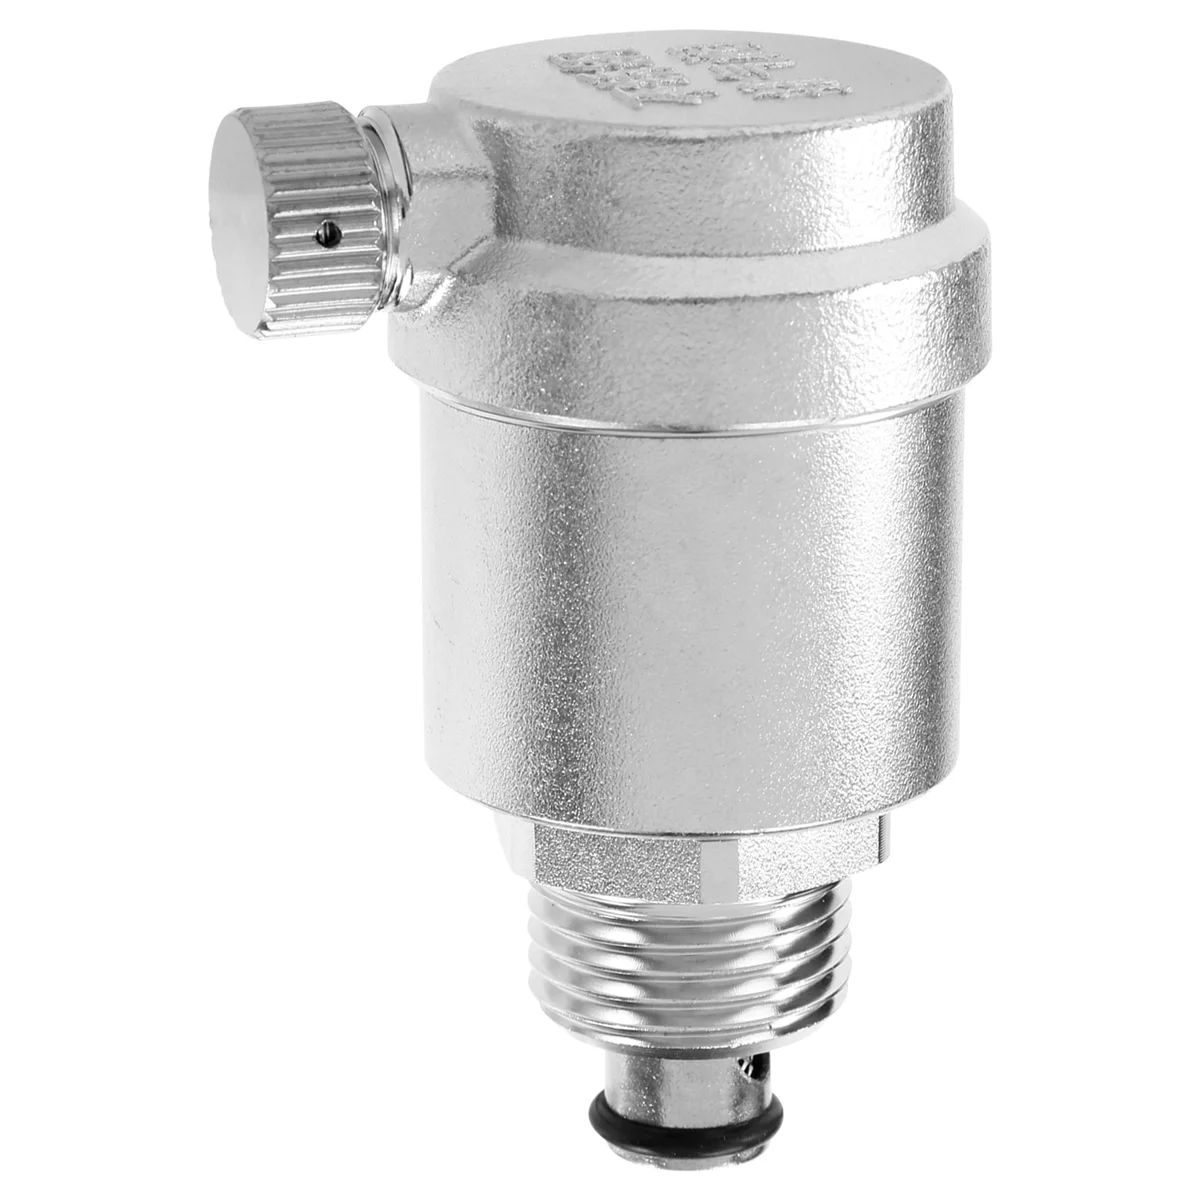 

1/2 Inch Stainless Steel 304 Automatic Air Vent Valve for Solar Water Heater Pressure Relief Valve 10Bar